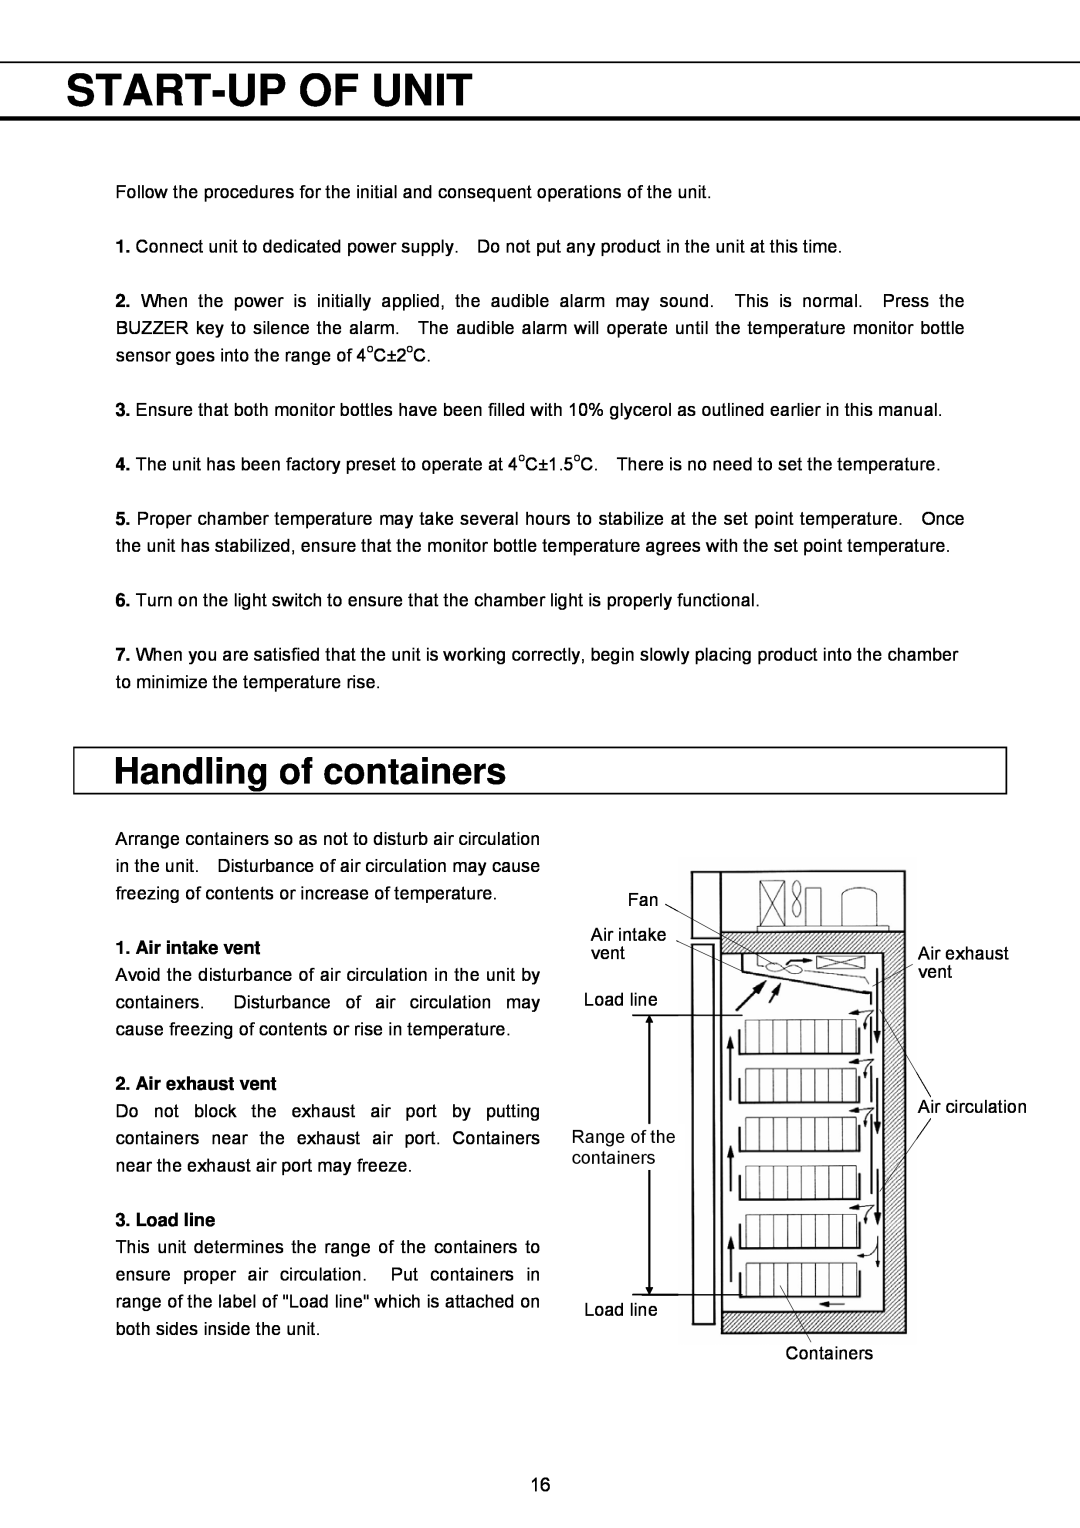 Sanyo MBR-1404GR instruction manual Start-Up Of Unit, Handling of containers 